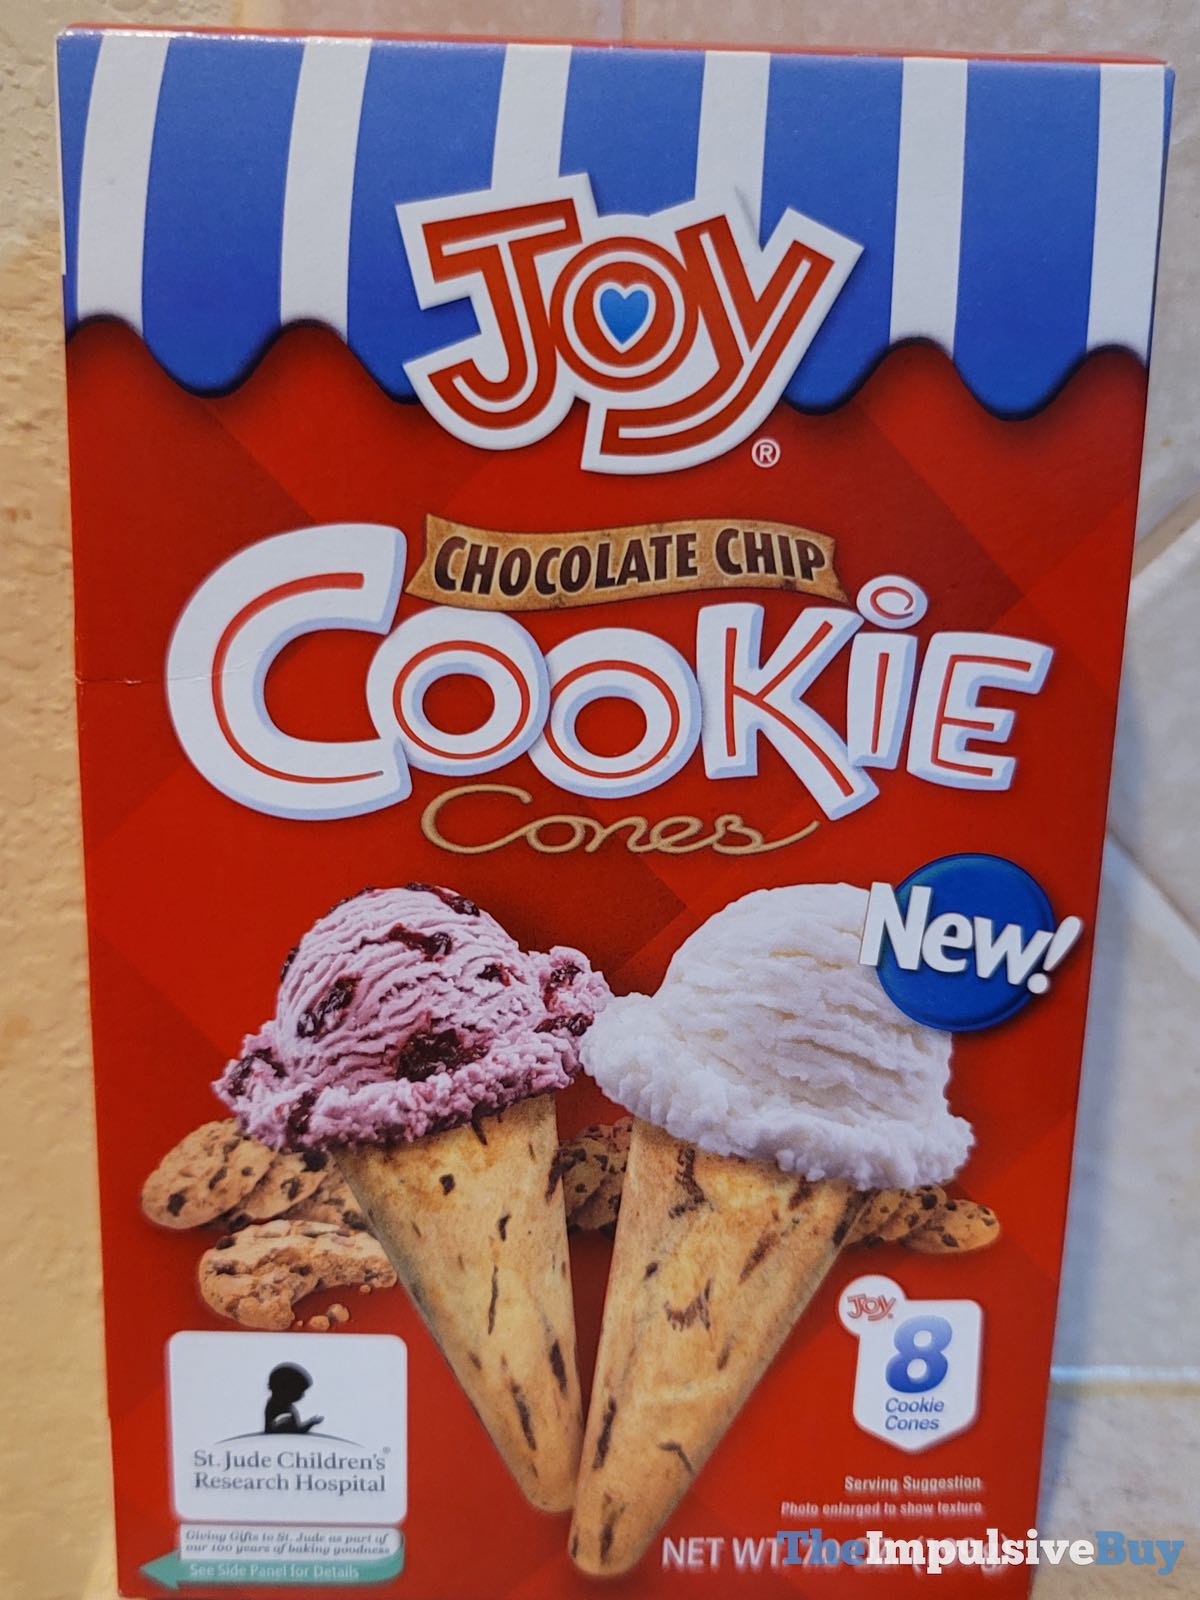 SPOTTED: Joy Chocolate Chip Cookie Cones - The Impulsive Buy